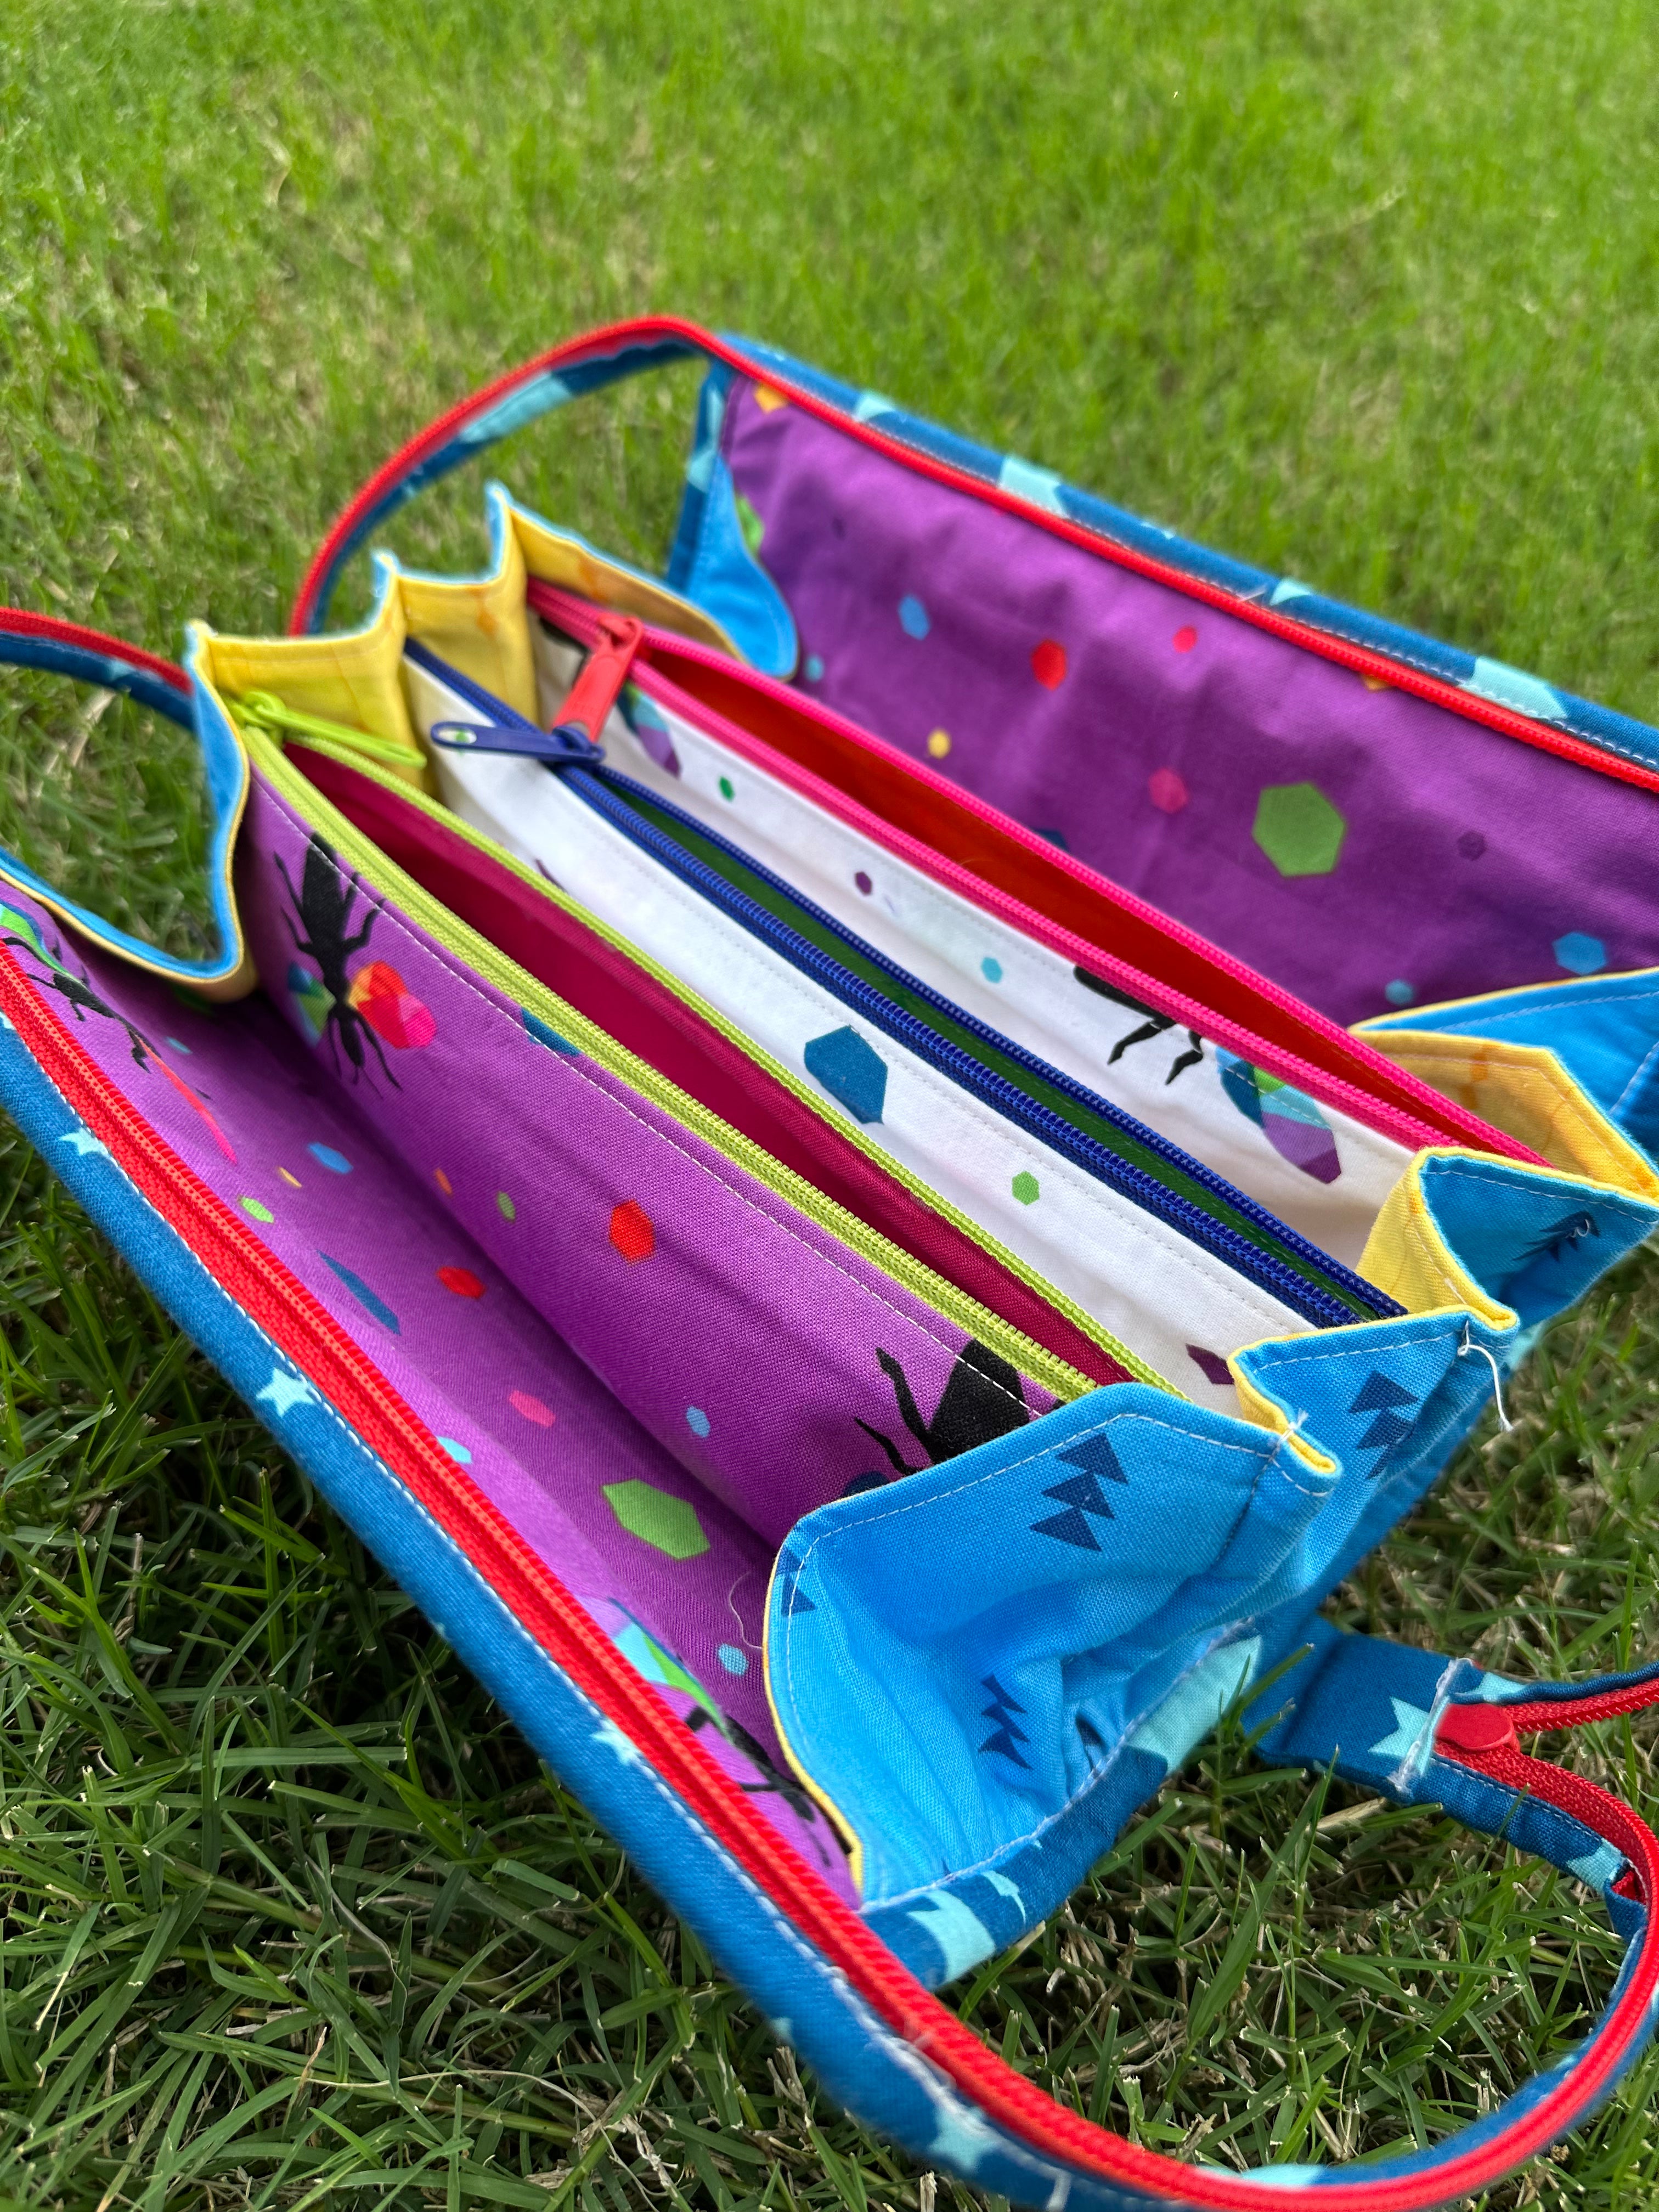 Sew Together Bag-Saturday, June 8-Collierville